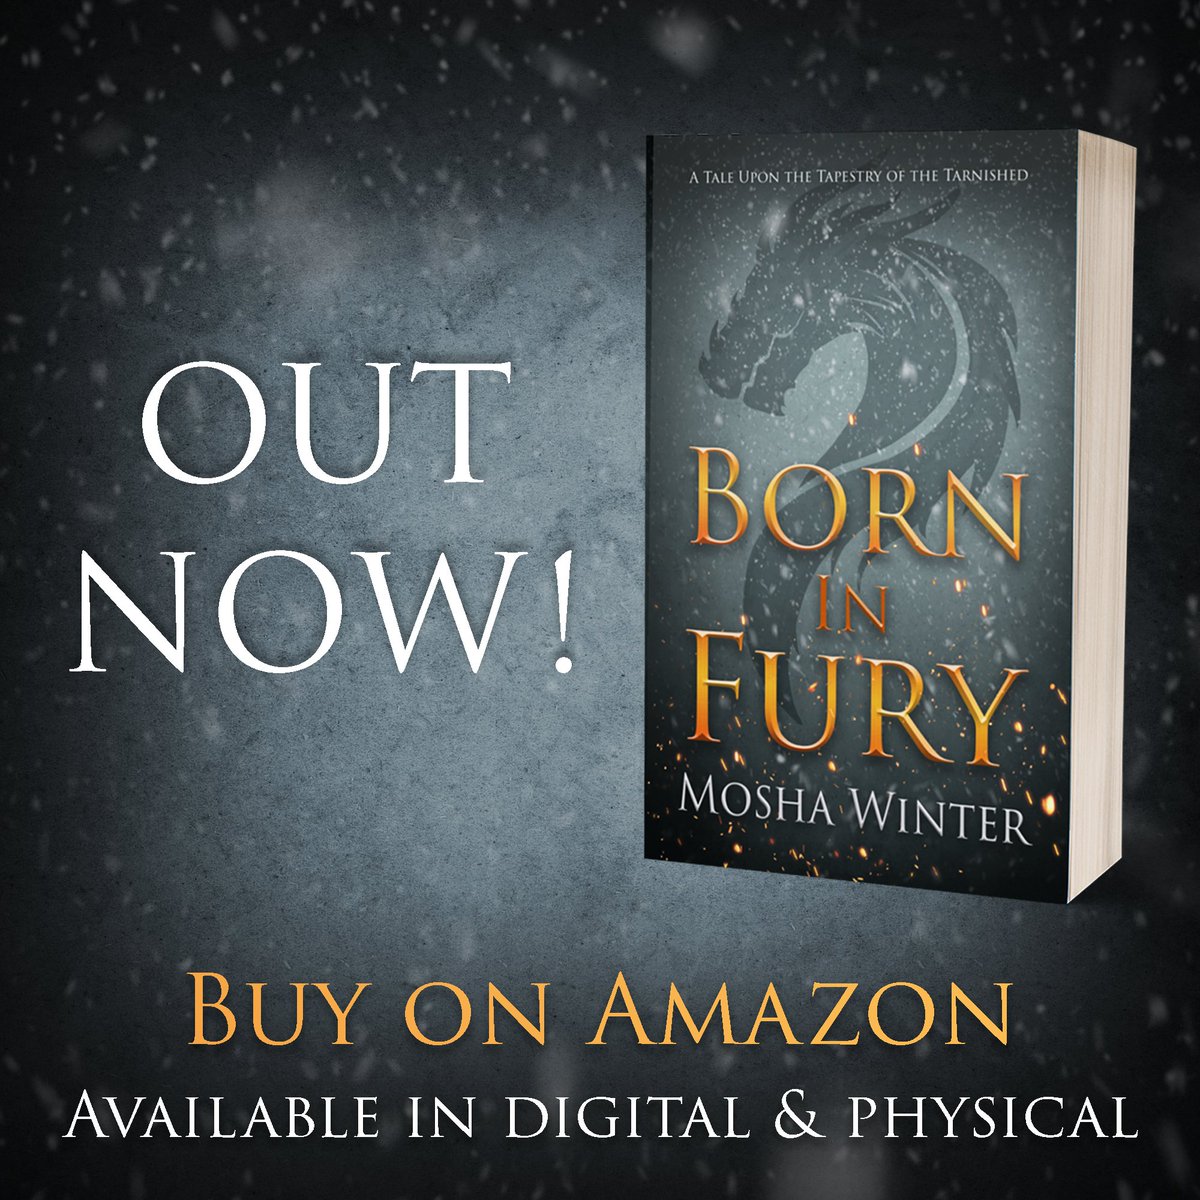 BORN IN FURY IS OUT NOW ON AMAZON WORLDWIDE! I've poured my heart and soul into this book for over a year; it is by far the biggest, most challenging project I have ever worked on. And now it's finally time to put it out into the world. I truly hope you enjoy it. #BornInFury